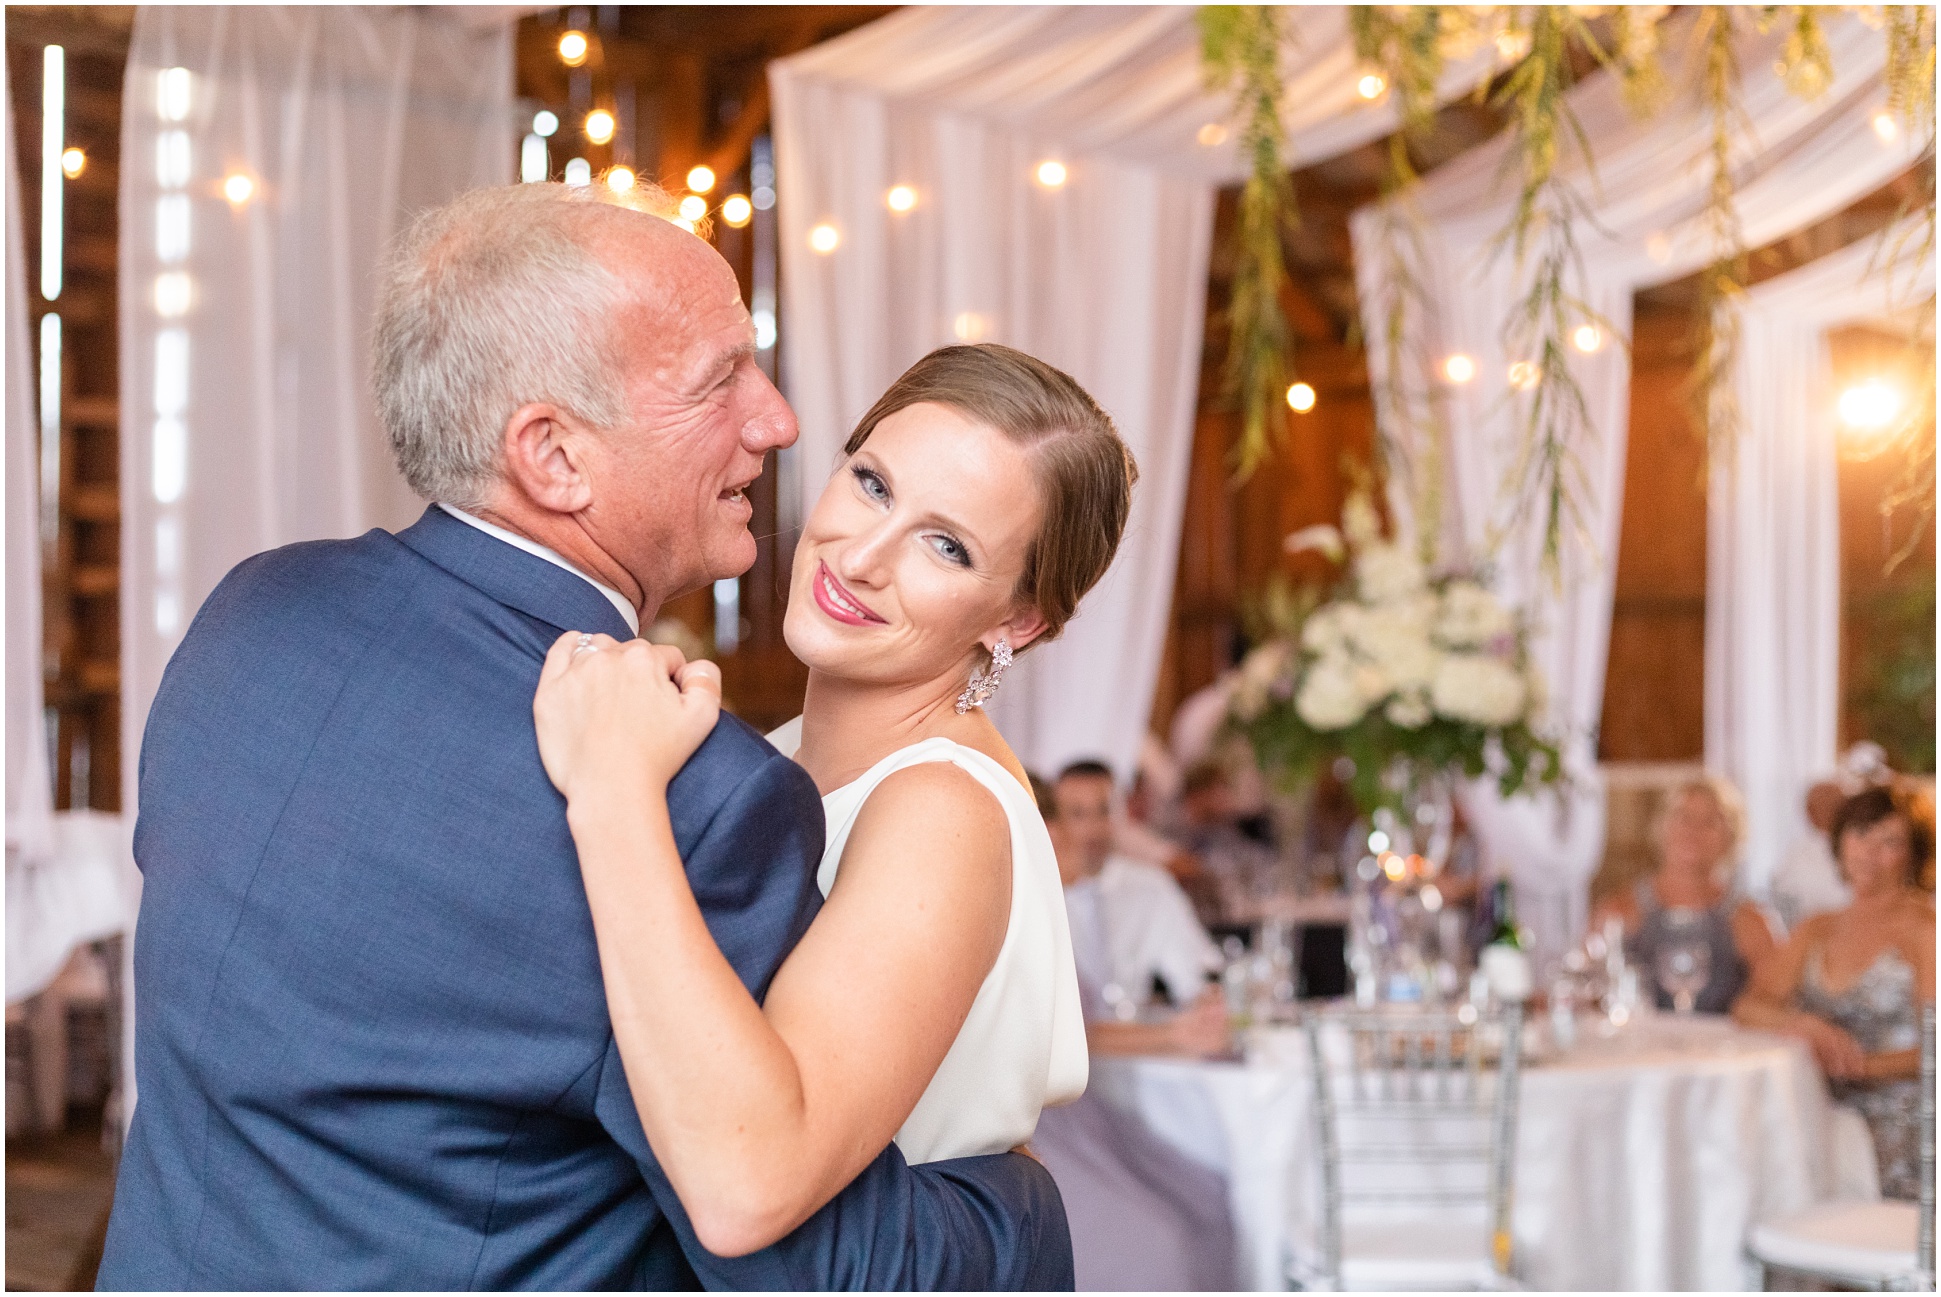 The bride dancing with her dad during the father-daughter dance